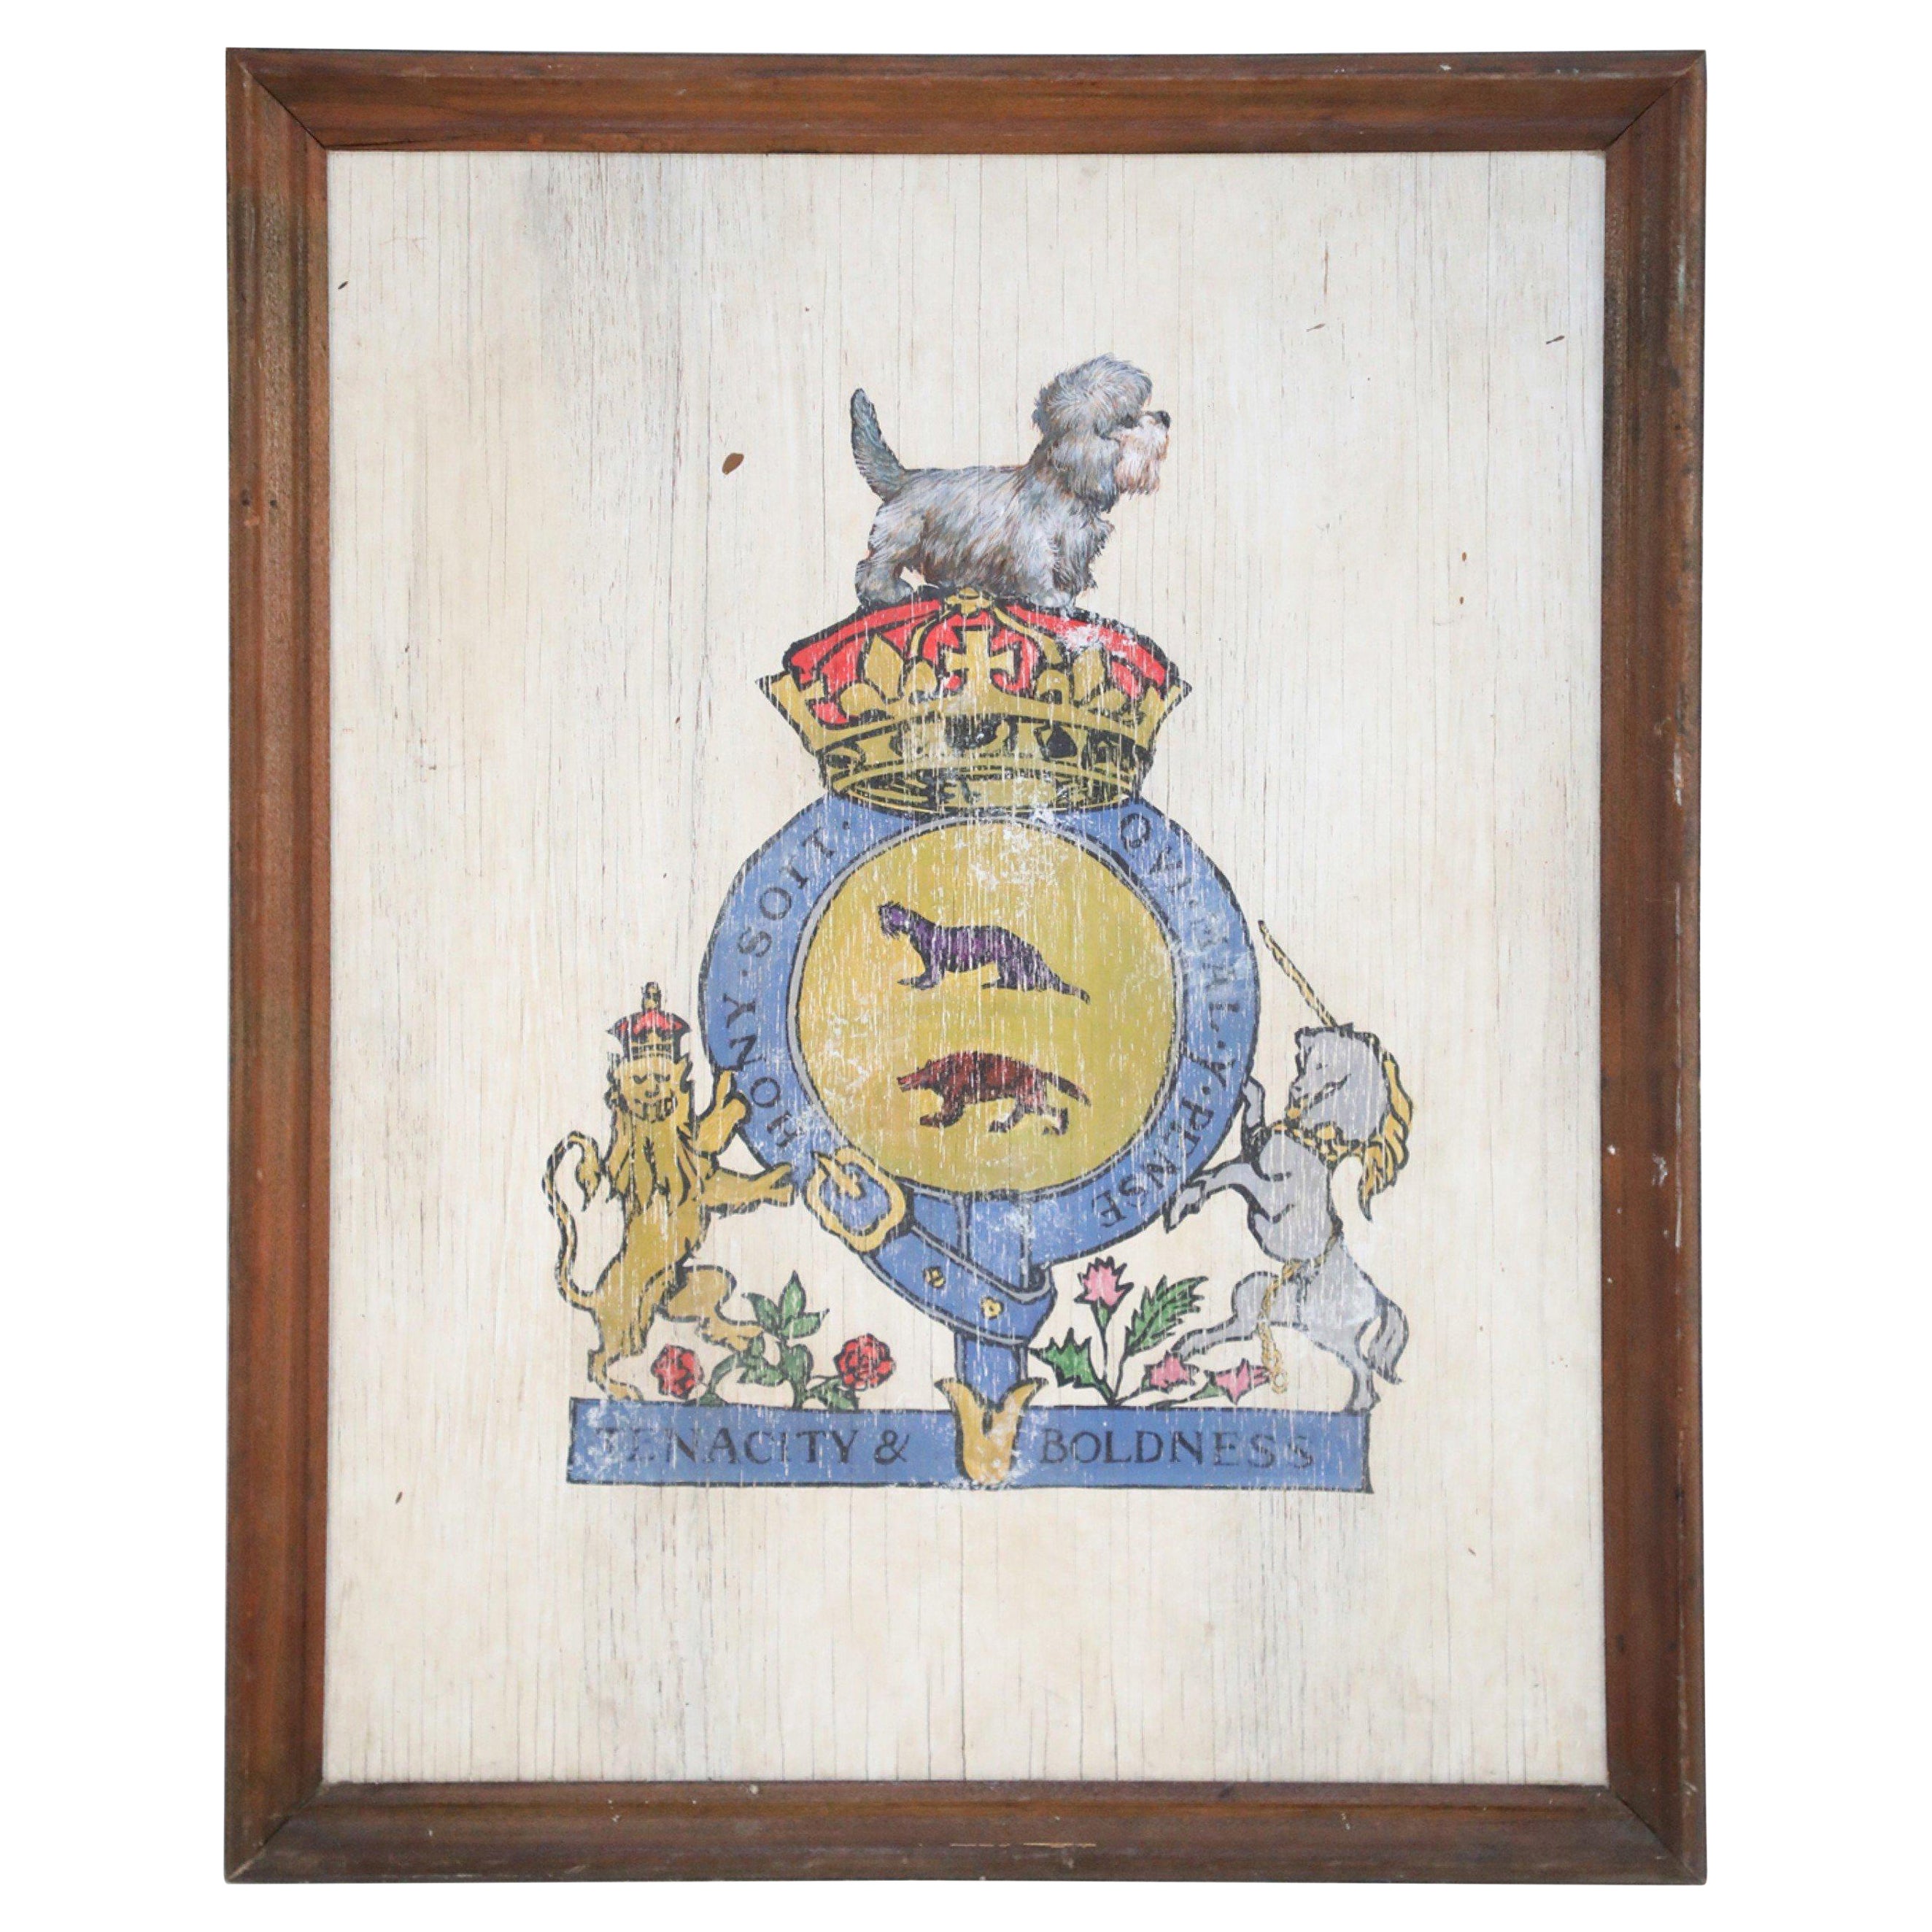 Tenacity & Boldness Painted Coat of Arms on Wood For Sale